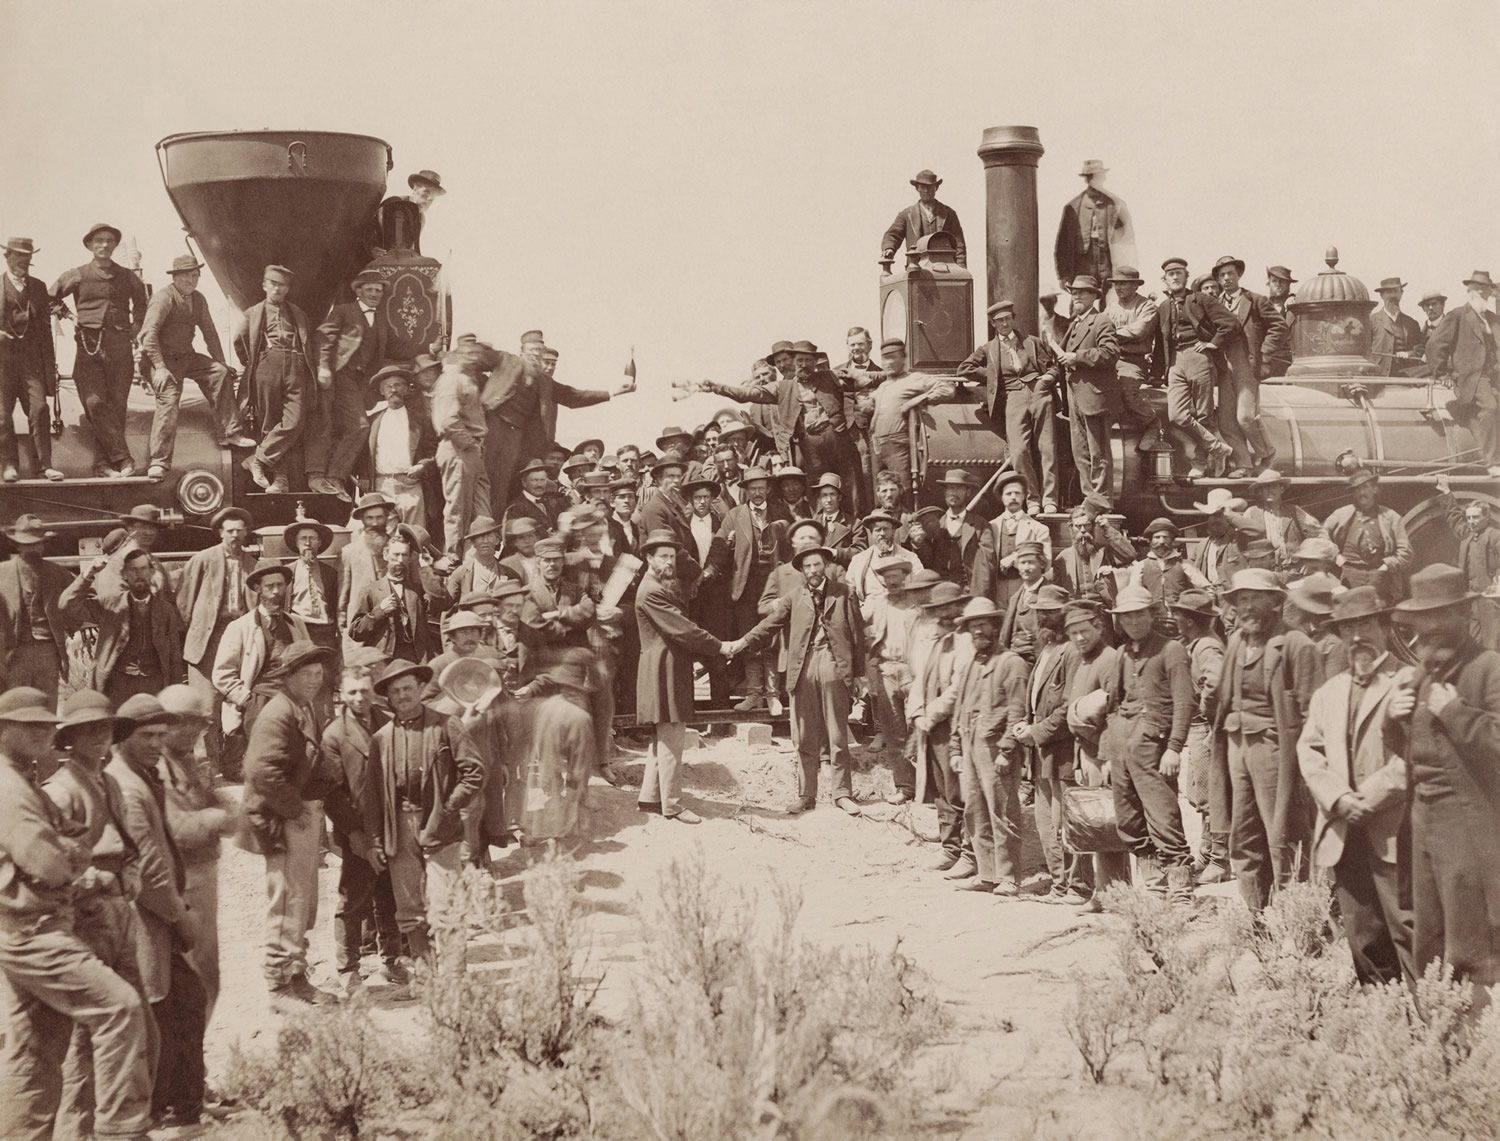 At the ceremony for the driving of the "Last Spike" at Promontory Summit, Utah, May 10, 1869